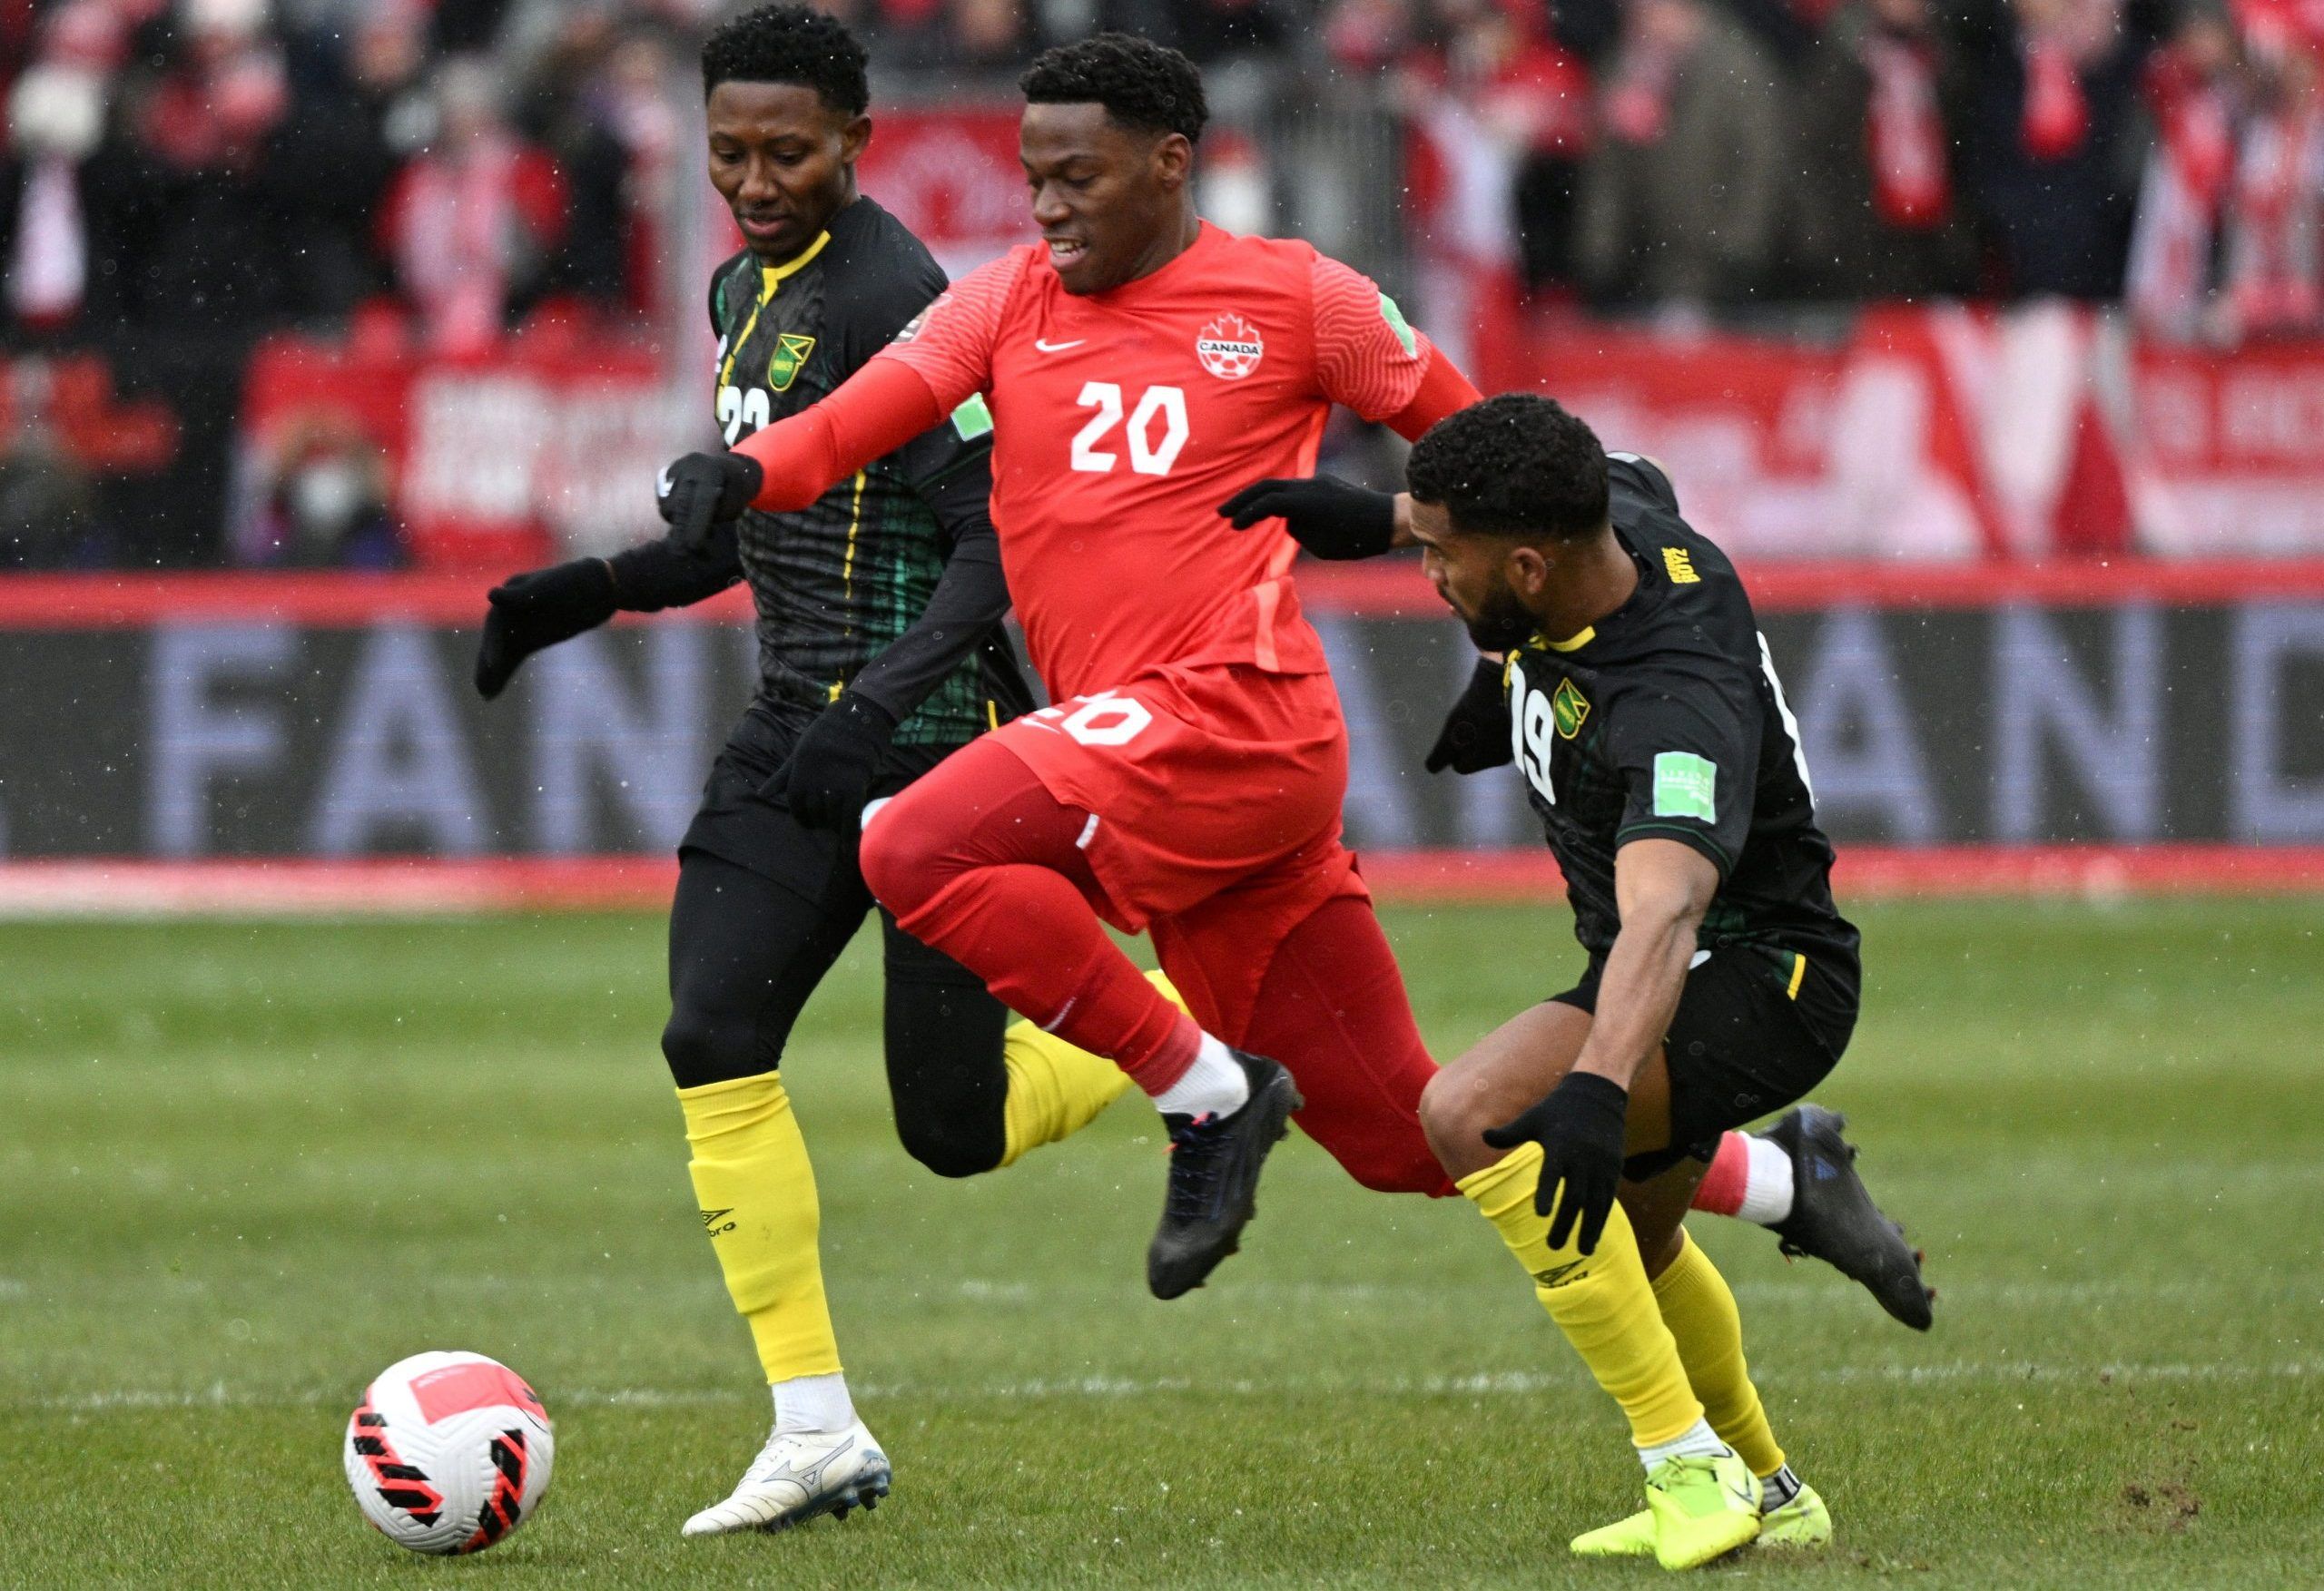 FILE PHOTO: Mar 27, 2022; Toronto, Ontario, CAN;   Canada forward Jonathan David (20) dribbles the ball between Jamaica midfielders Richard King (6) and Adrian Mariappa (19) in the first half of a FIFA World Cup qualifying soccer match at BMO Field. Mandatory Credit: Dan Hamilton-USA TODAY Sports/File Photo